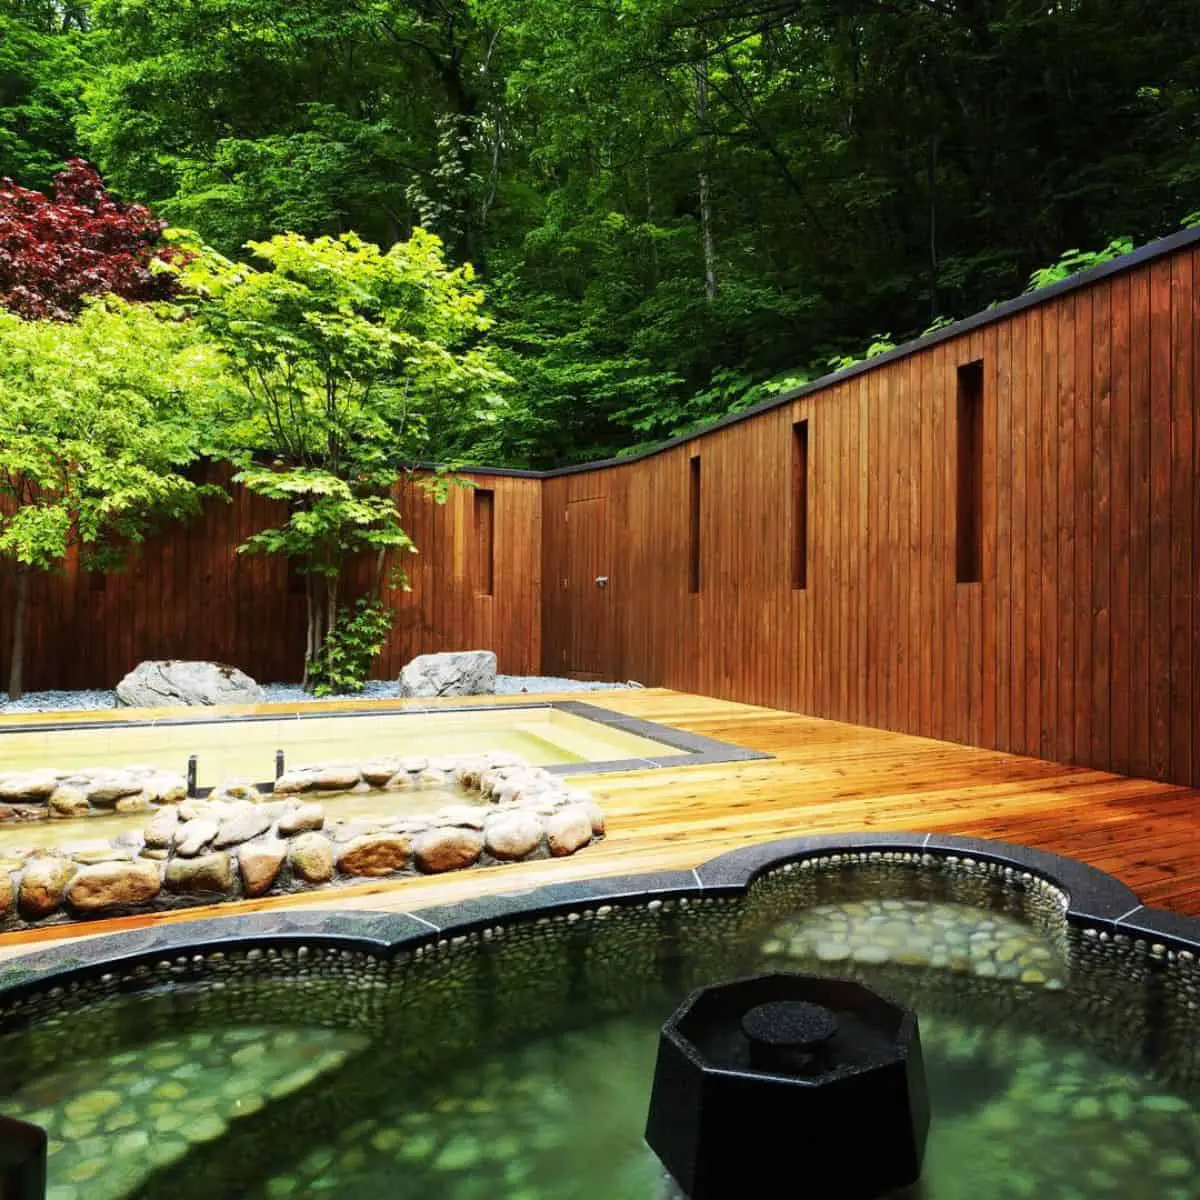 Outdoor bath with a natural forest view